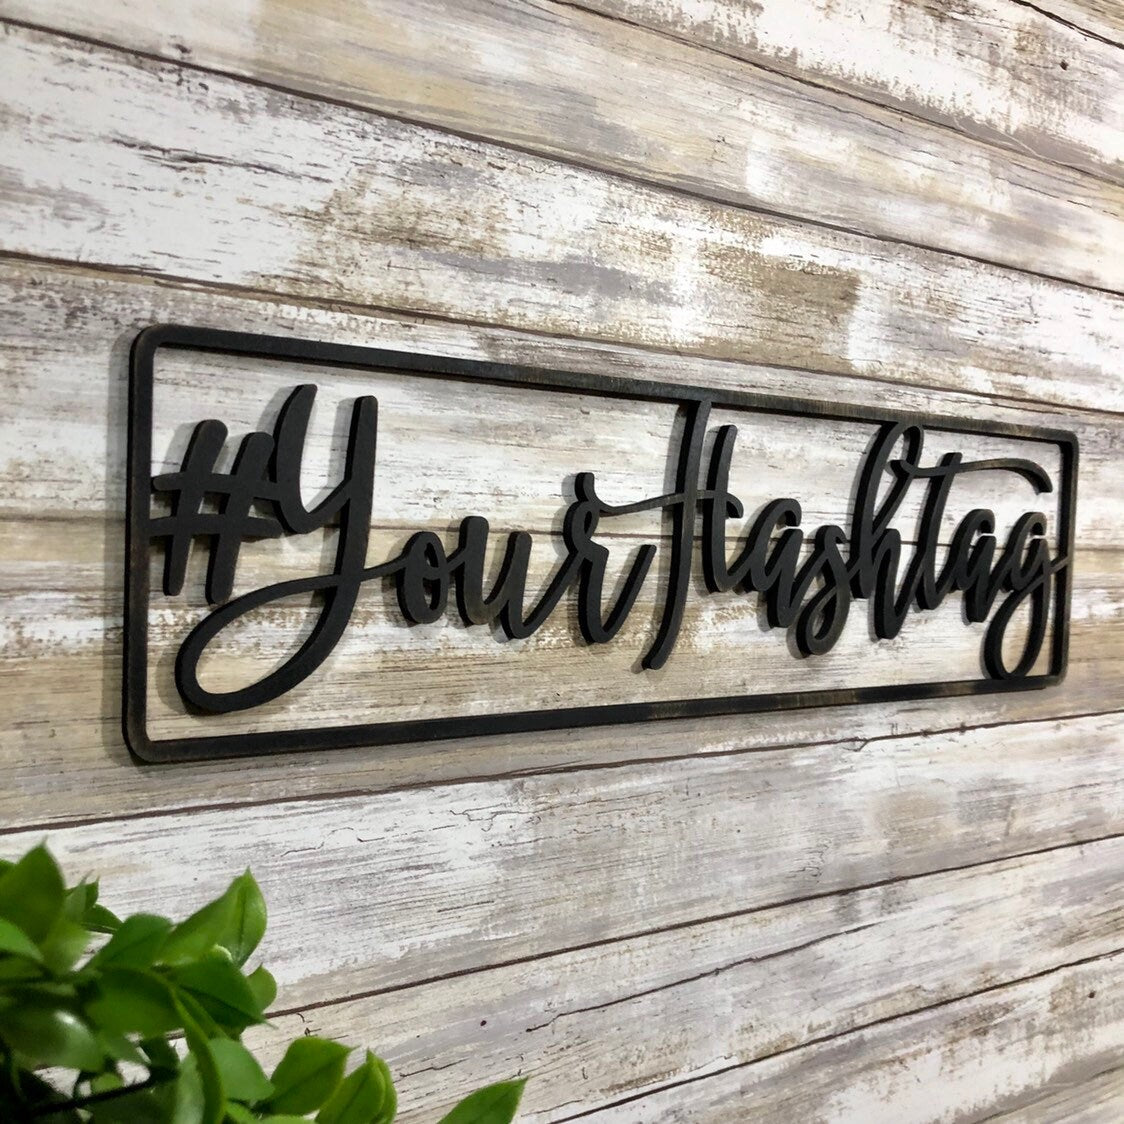 Wedding Social Media Hashtag Sign, Happy Birthday Party Hashtag Sign, Photo Booth Prop, Wedding Hashtag Banner, Bachelorette Party Sign